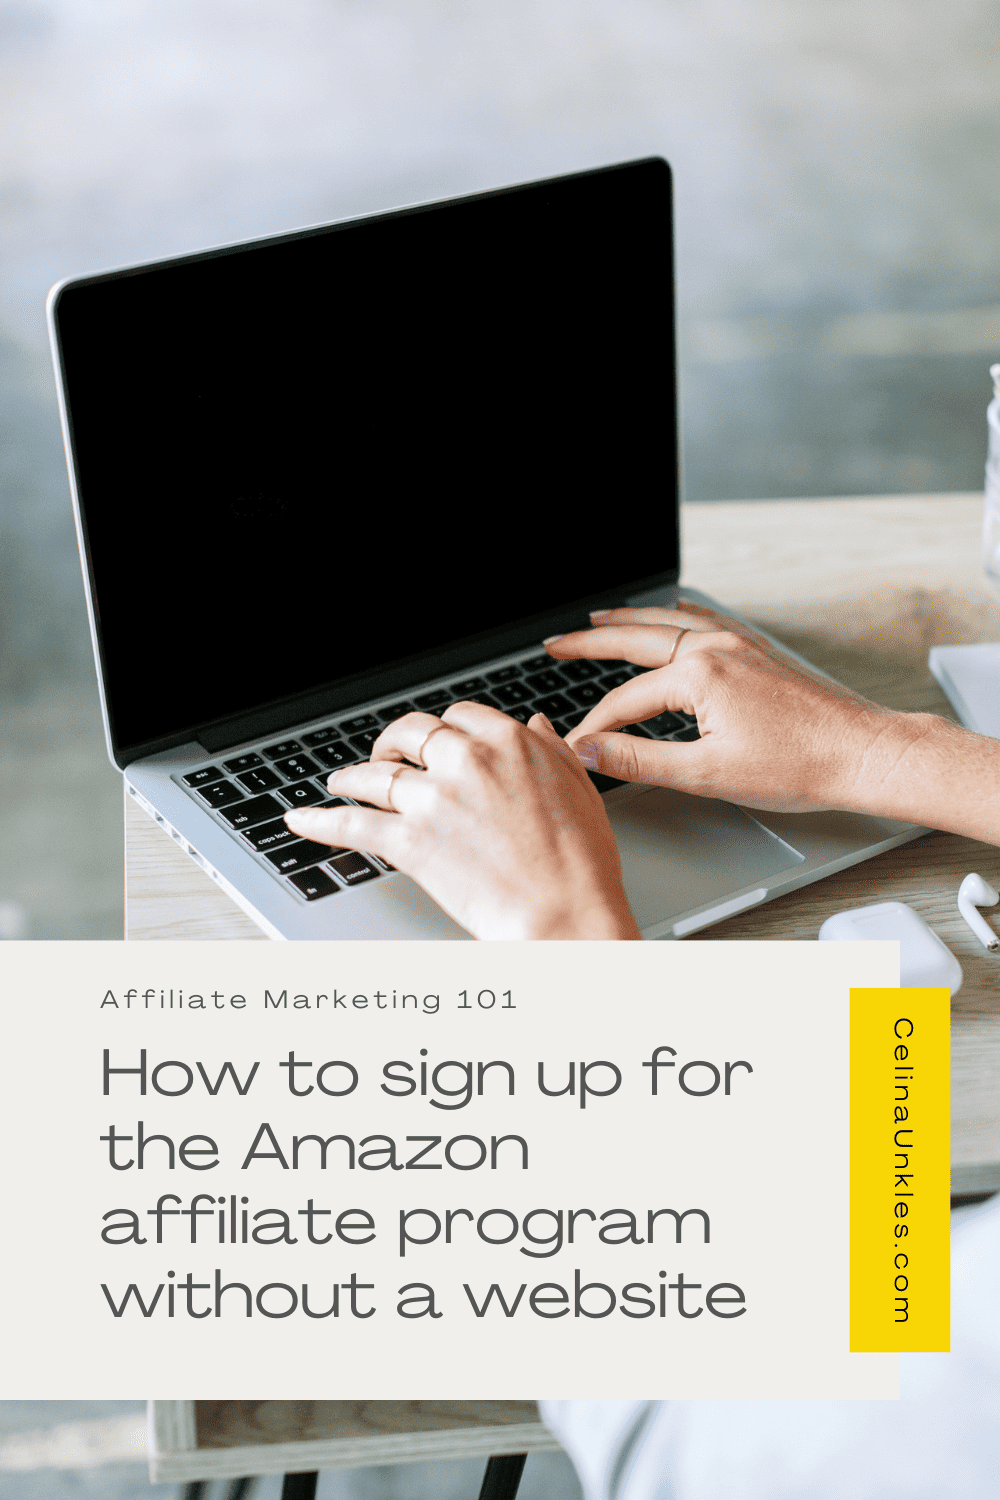 How to sign up for the Amazon affiliate program without a website